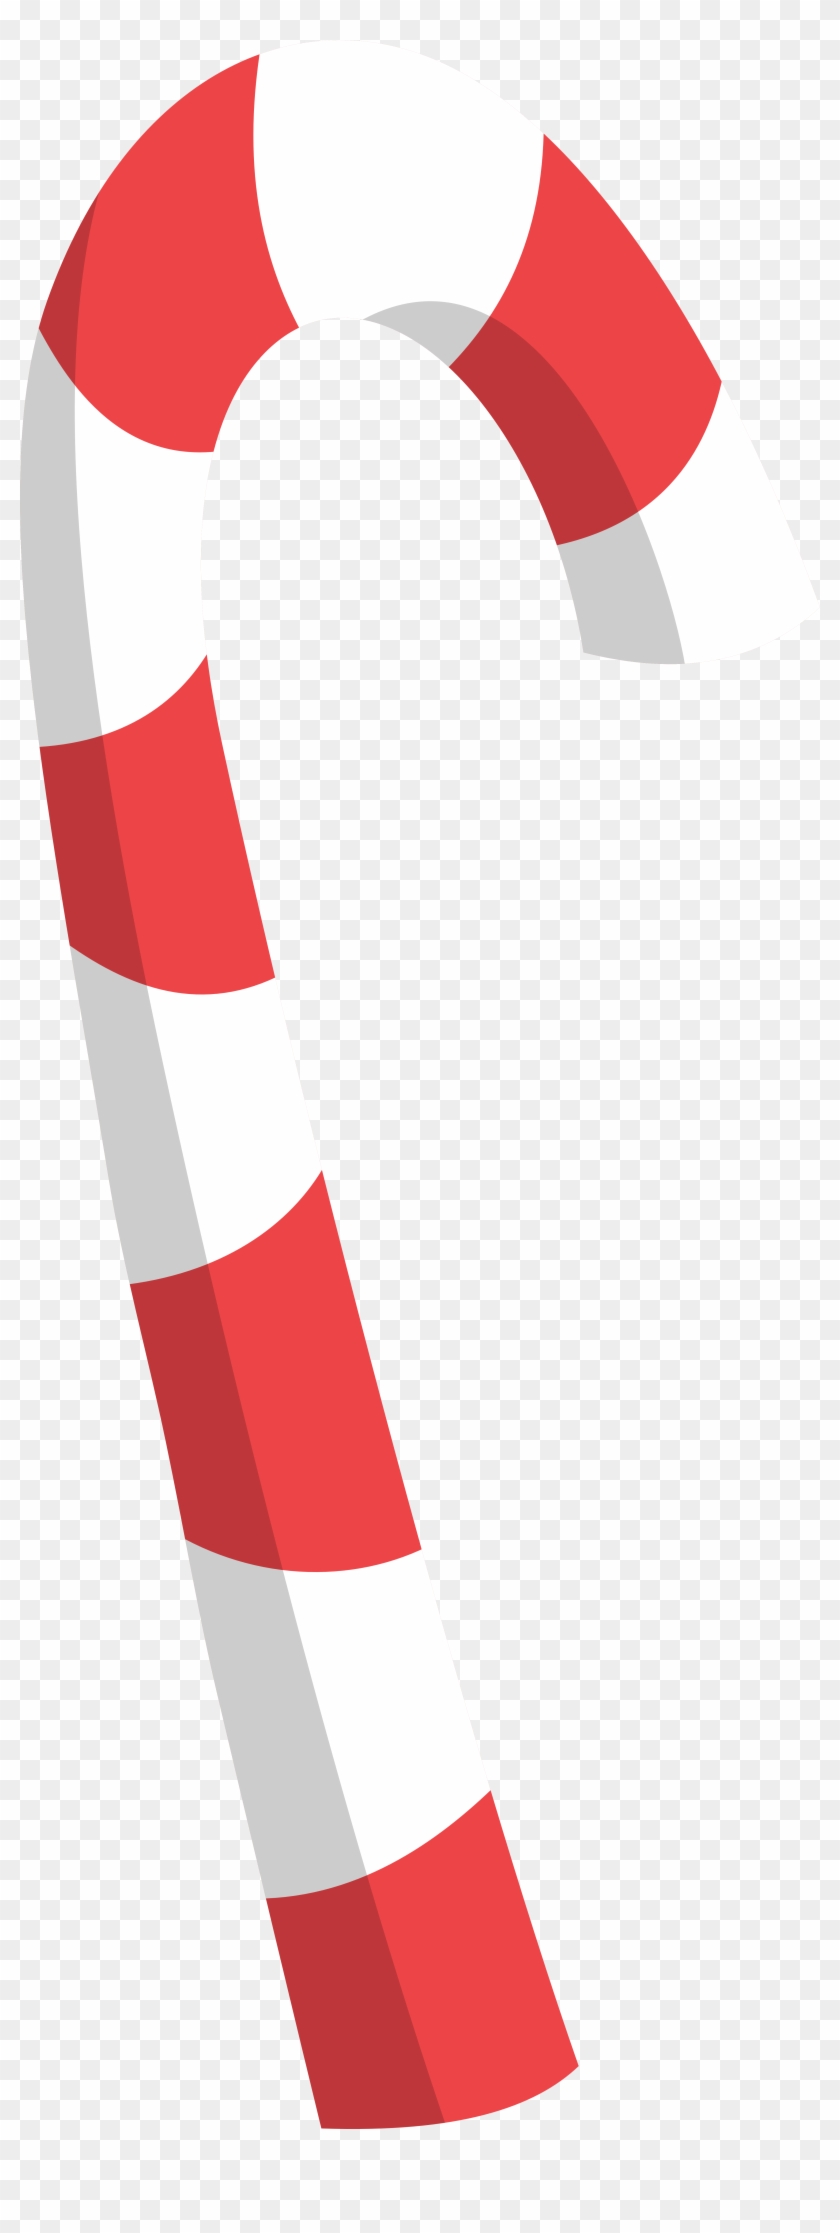 Candy Cane Vector Png #527731